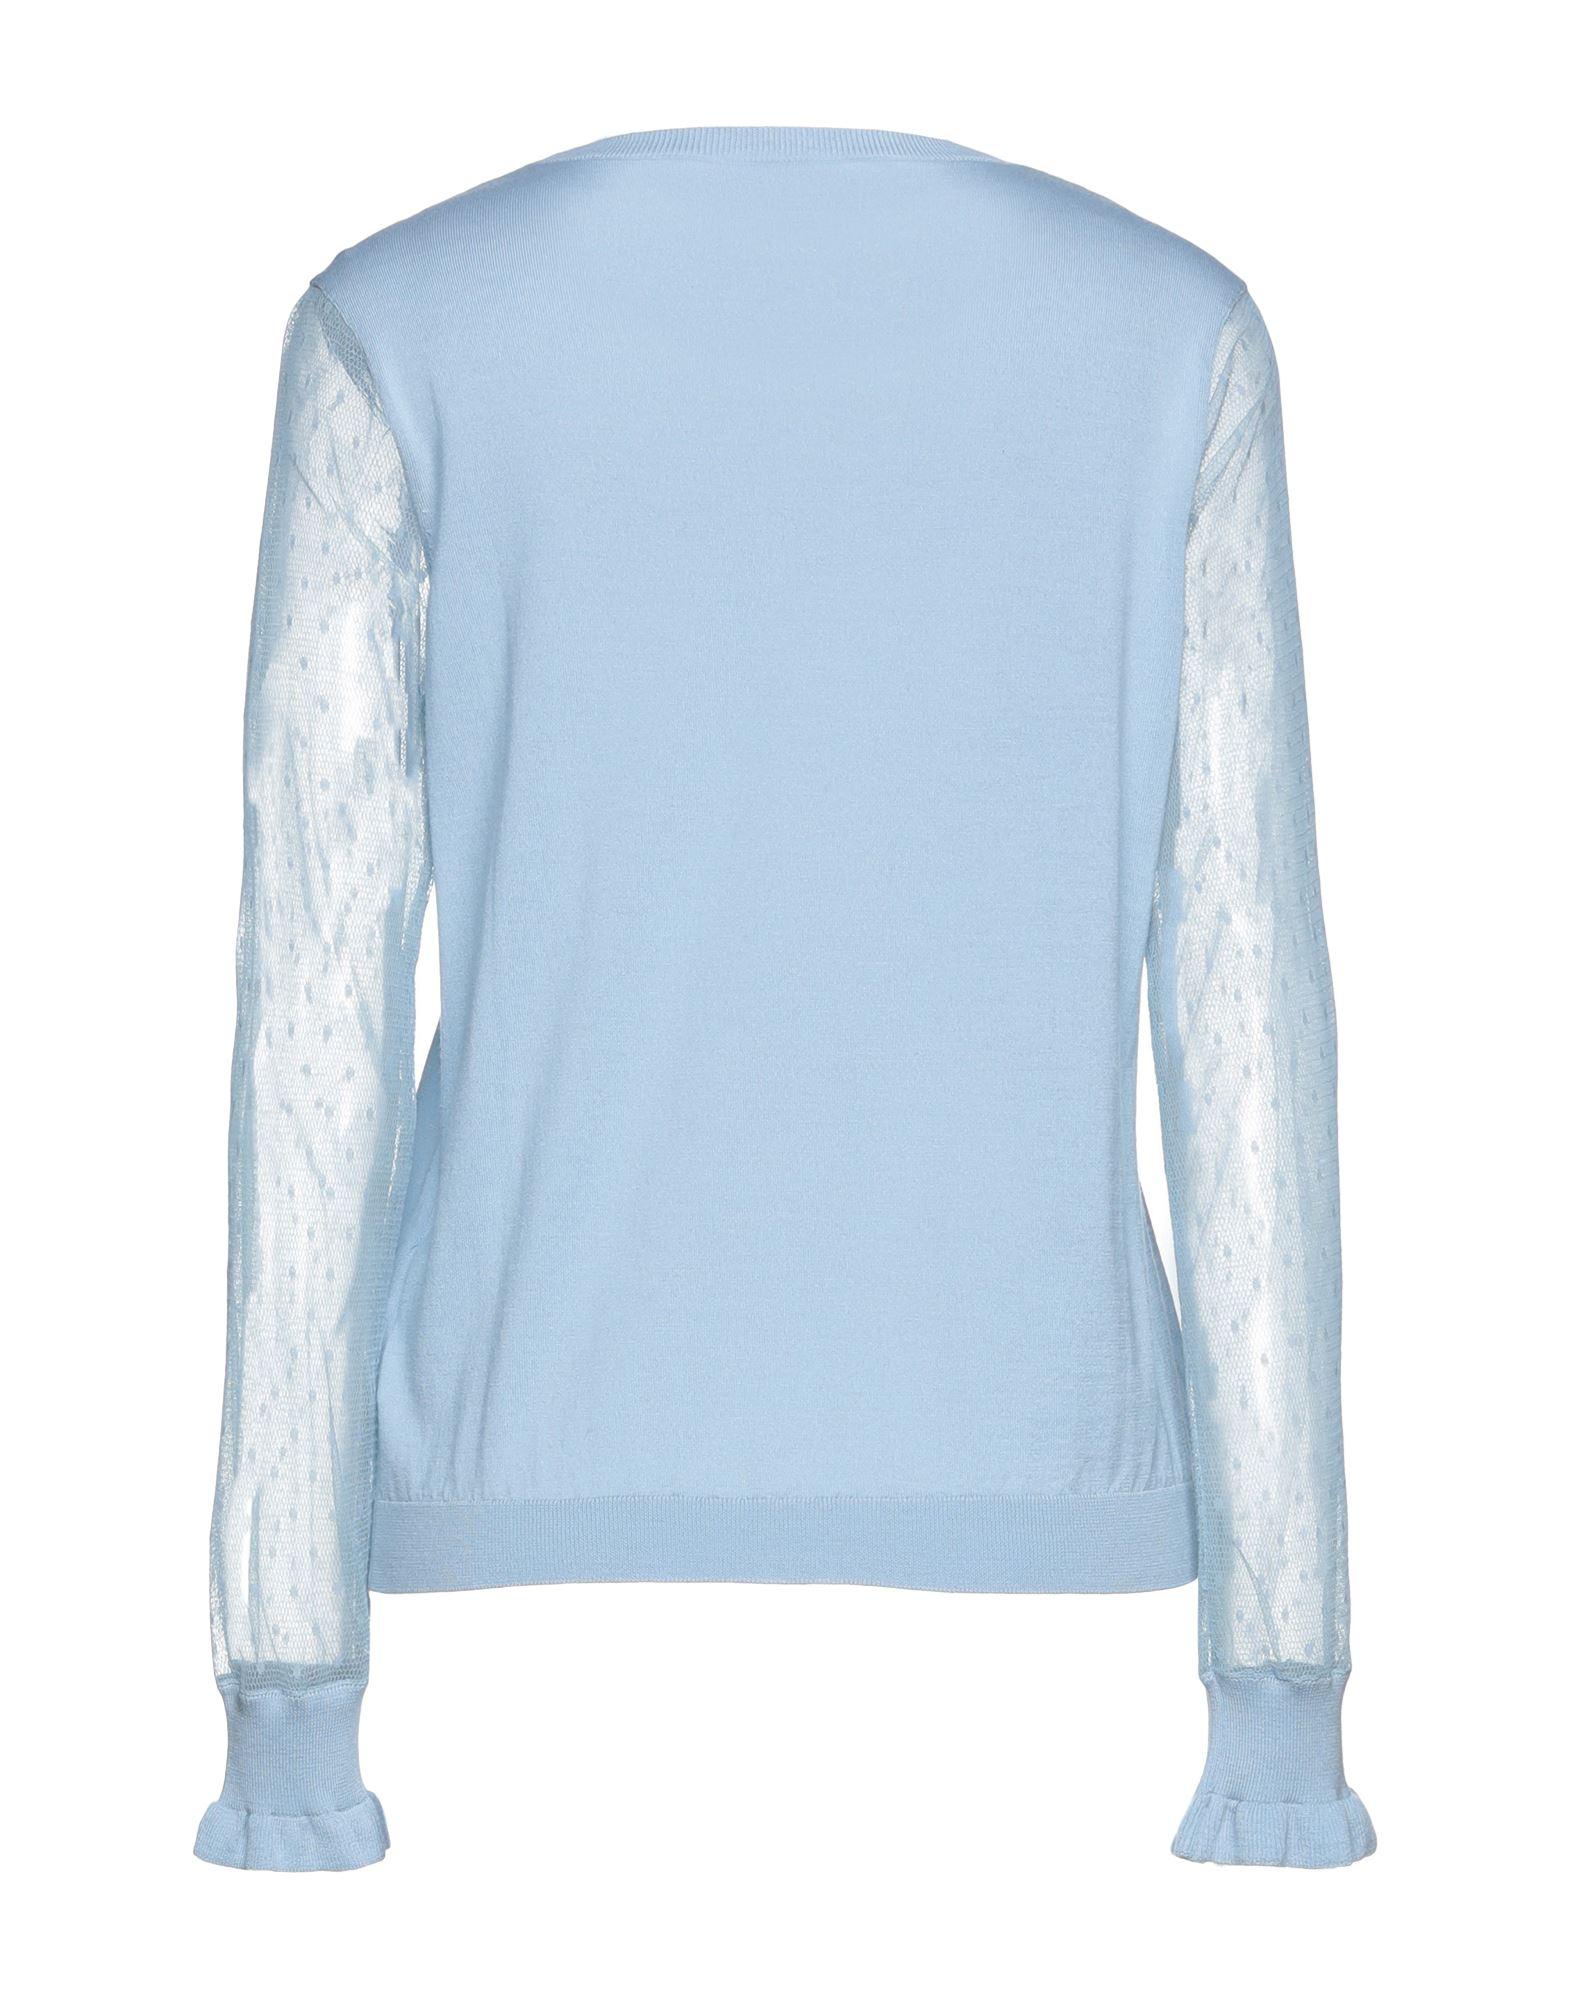 RED Valentino Jumper in Sky Blue (Blue) - Lyst